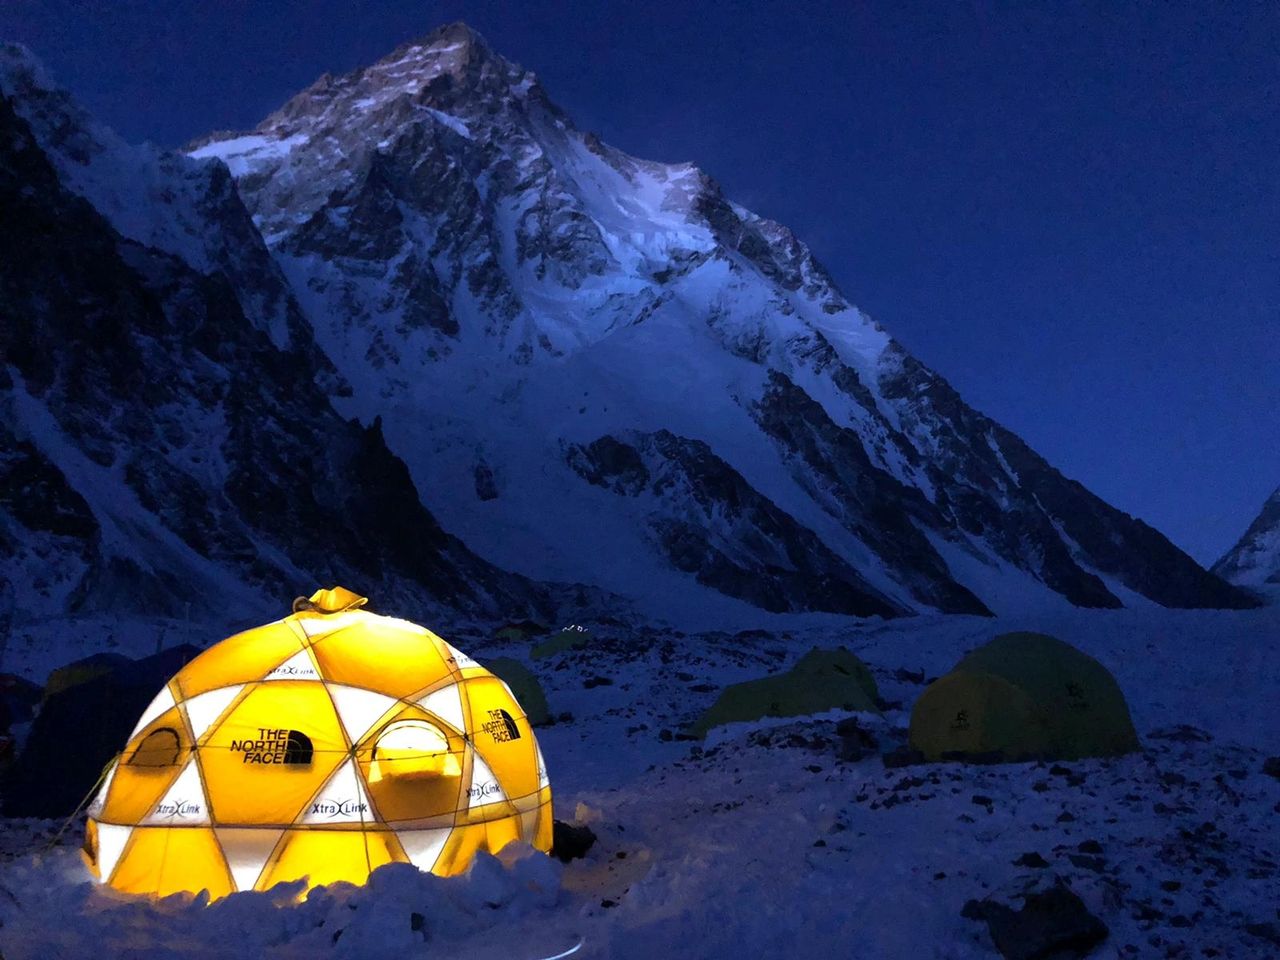 K2 Winter 2021 Expedition: Busy Day in Base Camp